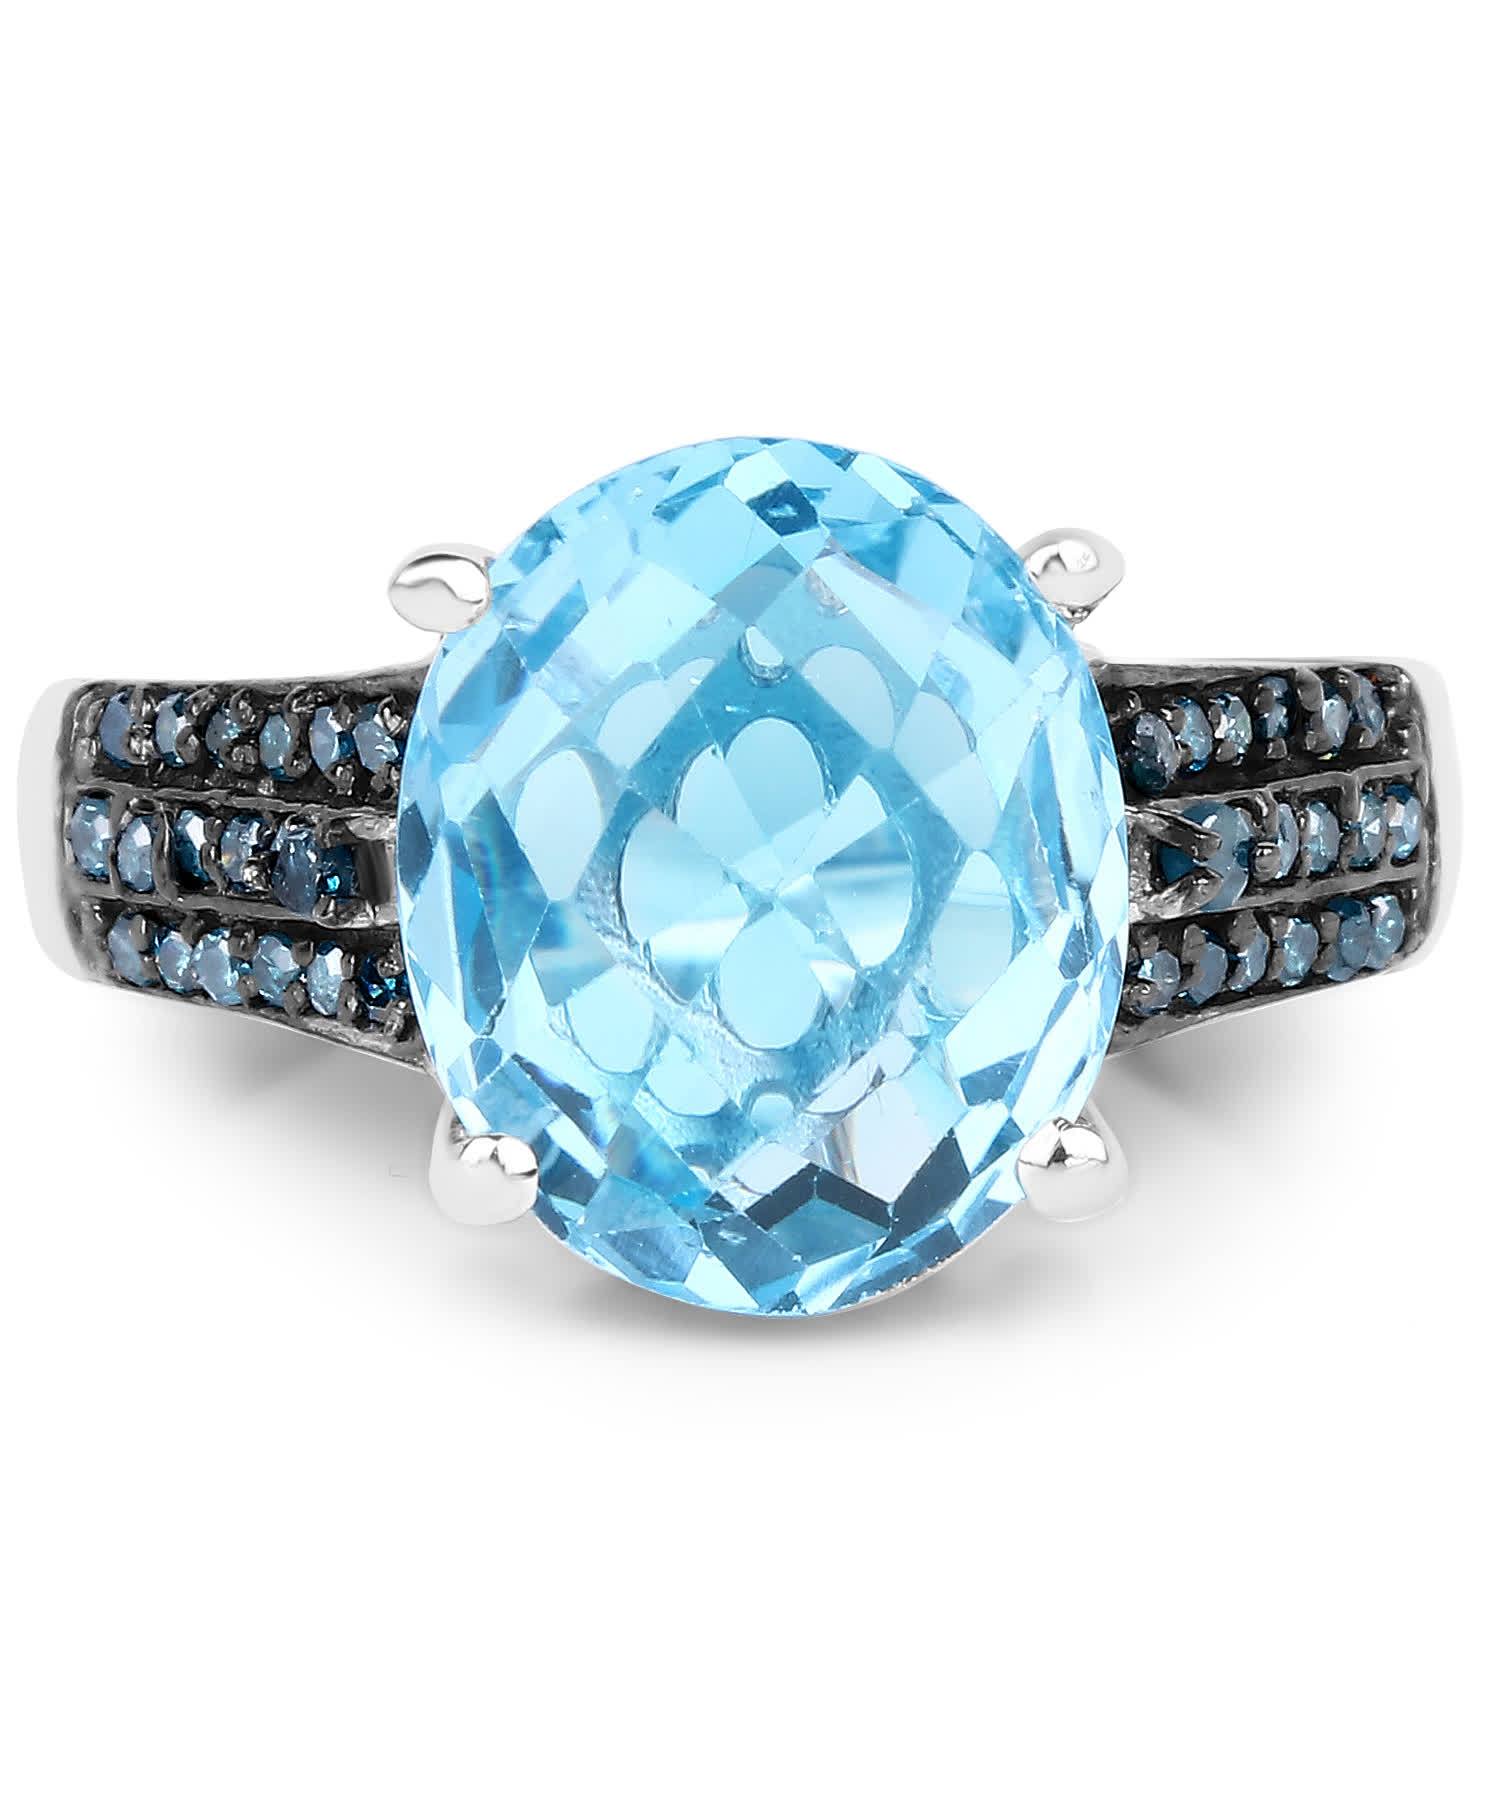 5.51ctw Natural Swiss Blue Topaz and Blue Diamond Rhodium Plated 925 Sterling Silver Cocktail Ring View 3